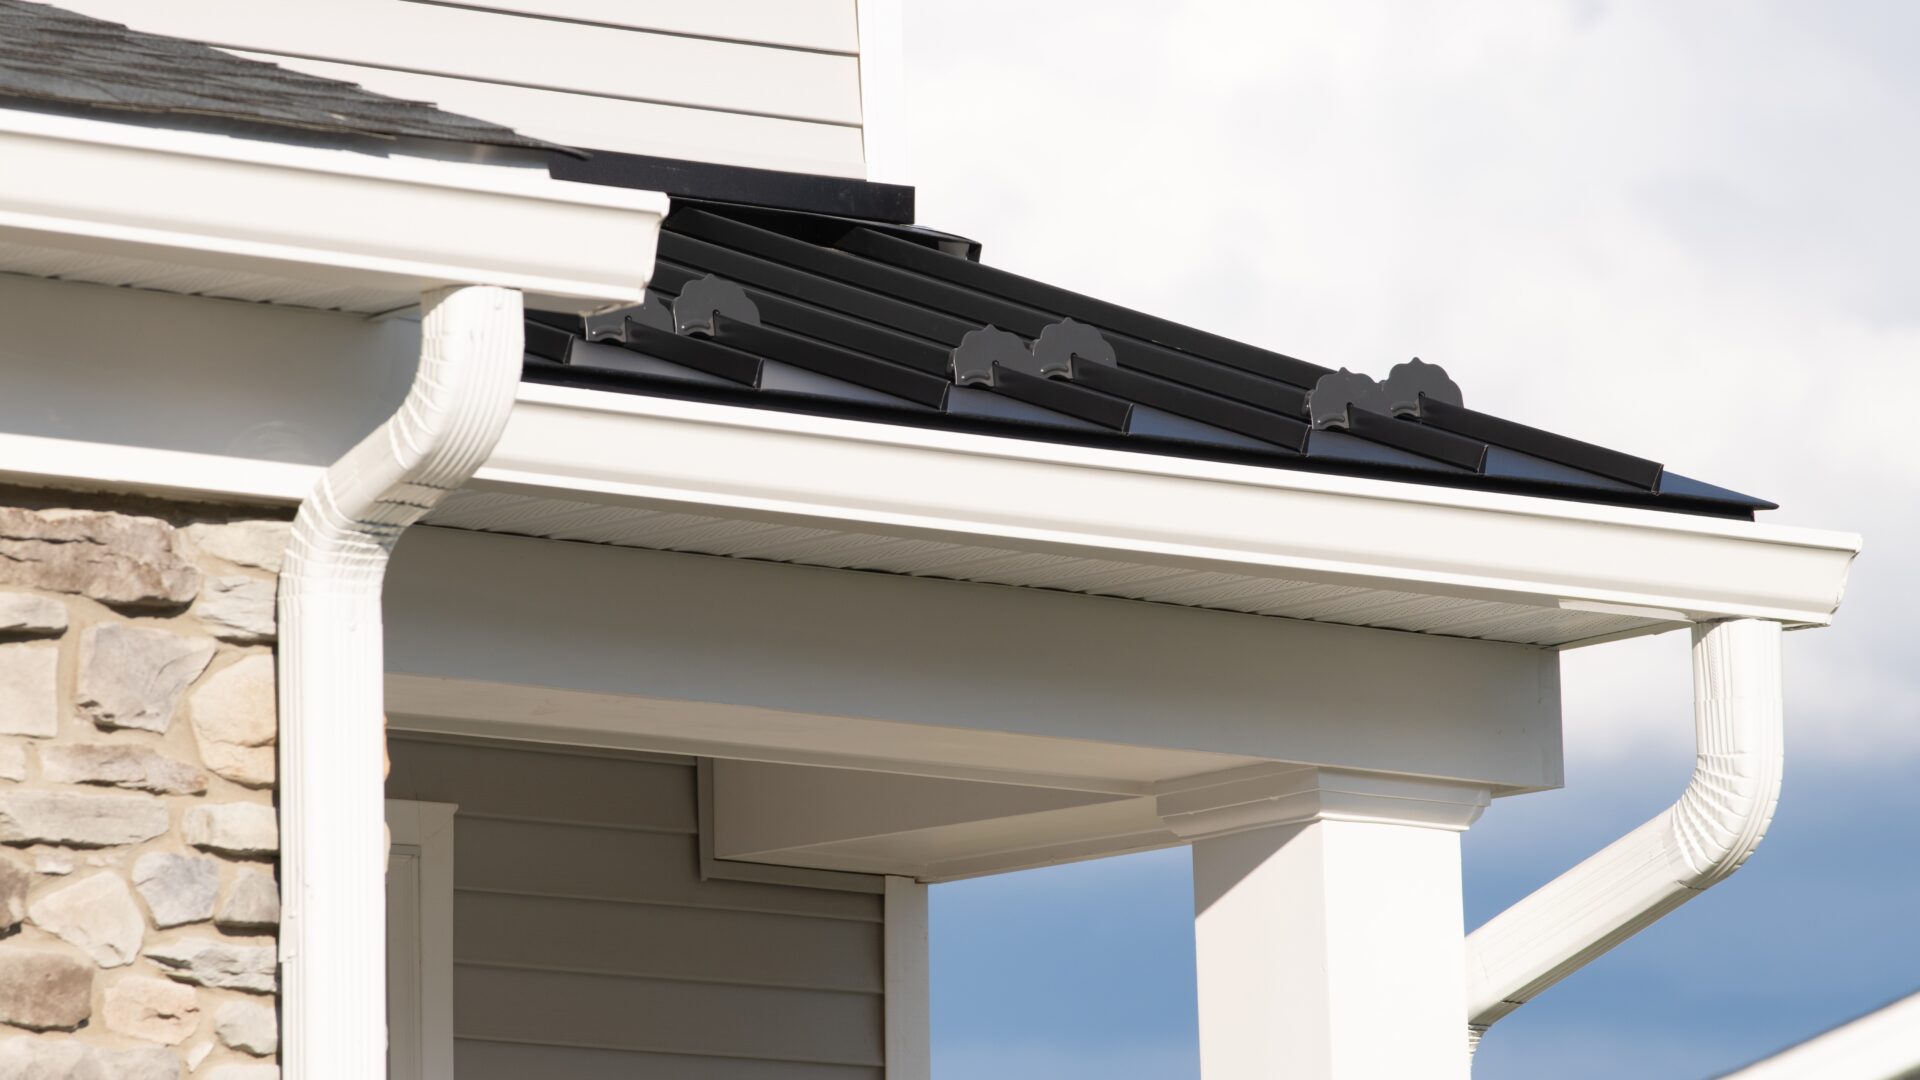 Closeup of a gutter downspout on a home with stone siding and a black metal roof